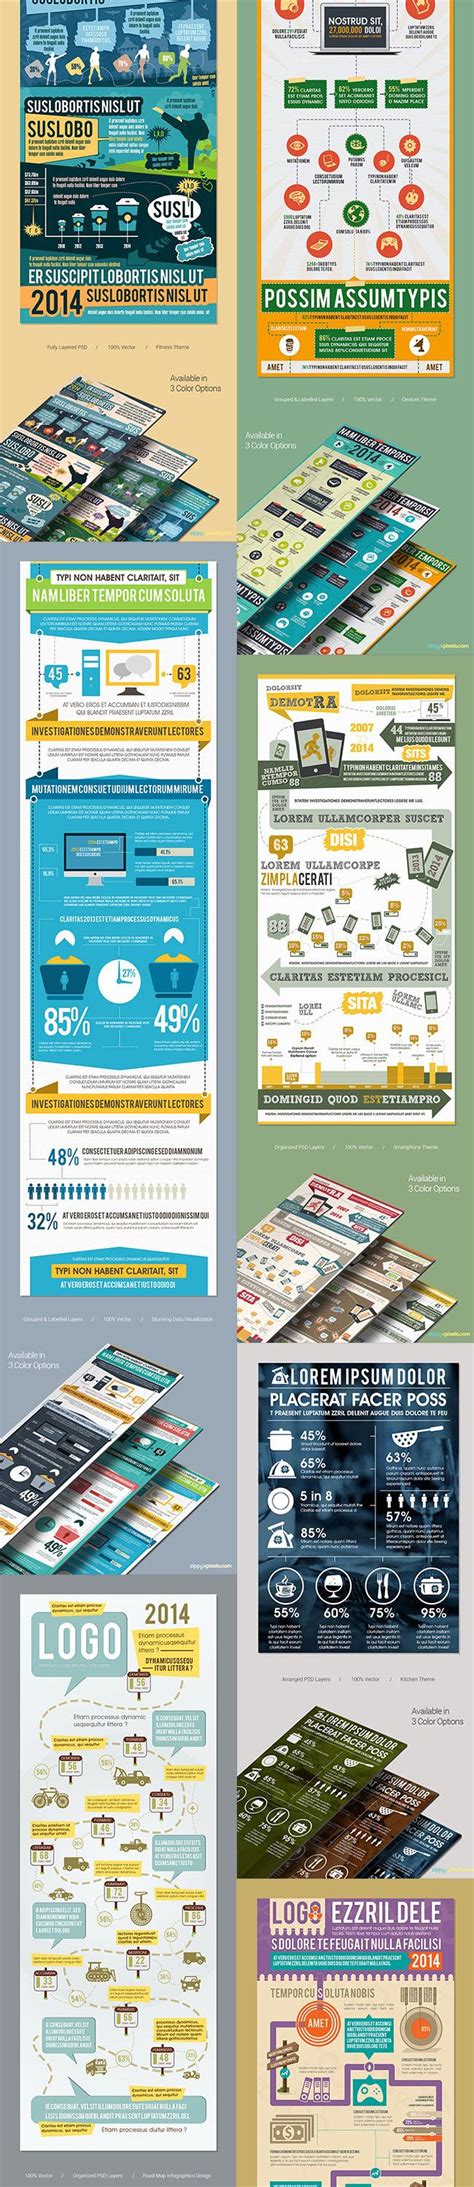 Mega Bundle Of 105 Incredible Infographic Templates Only 27